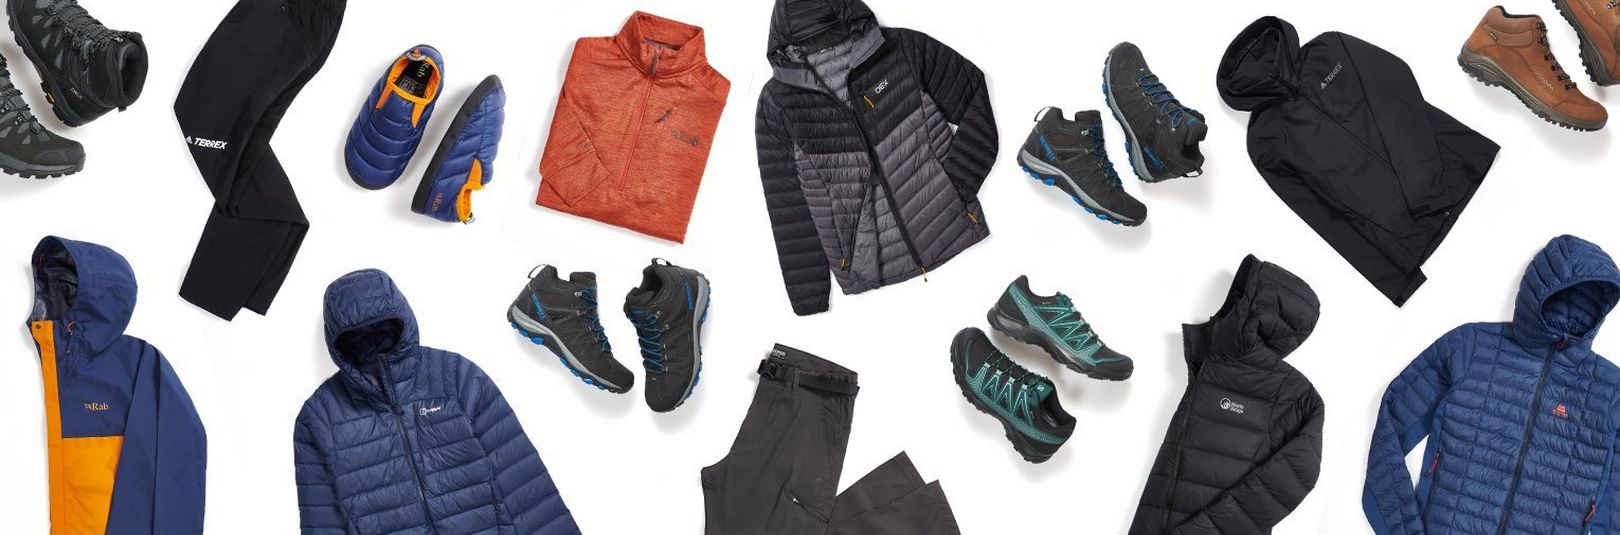 A flatlay image of outdoor products including men's clothing and footwear